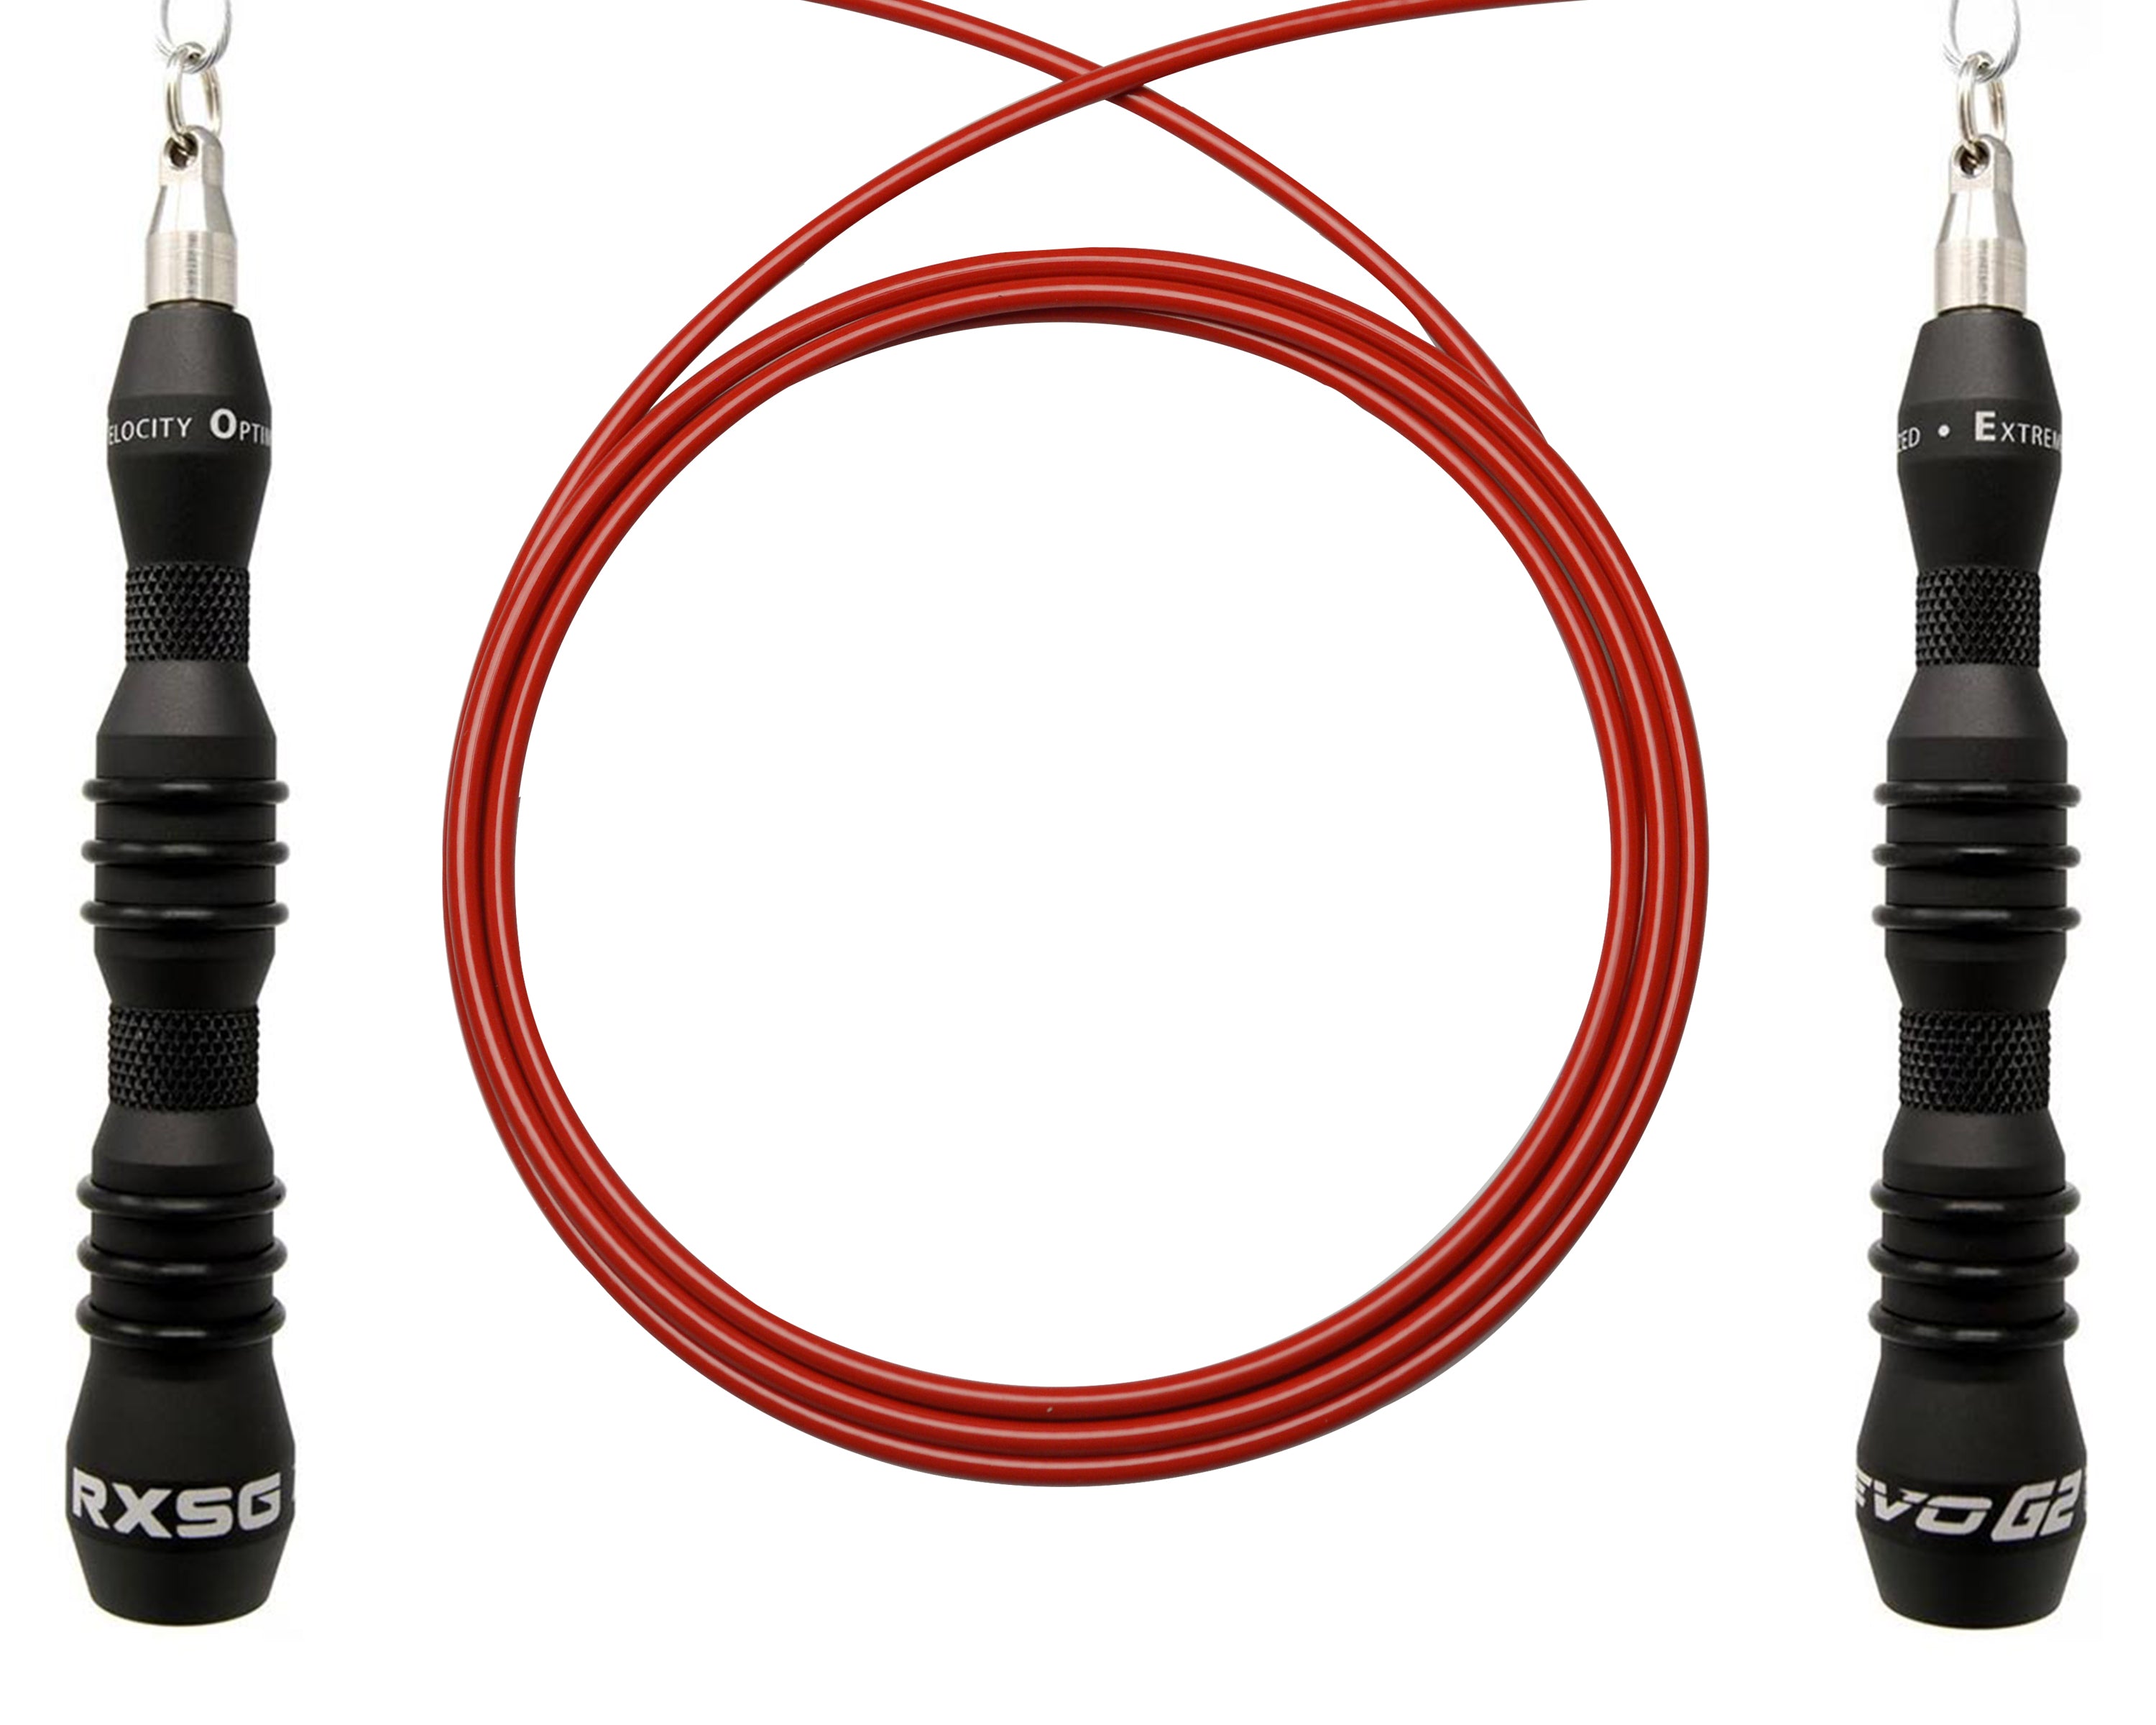 EVO G2 Speed Rope with Red Cable